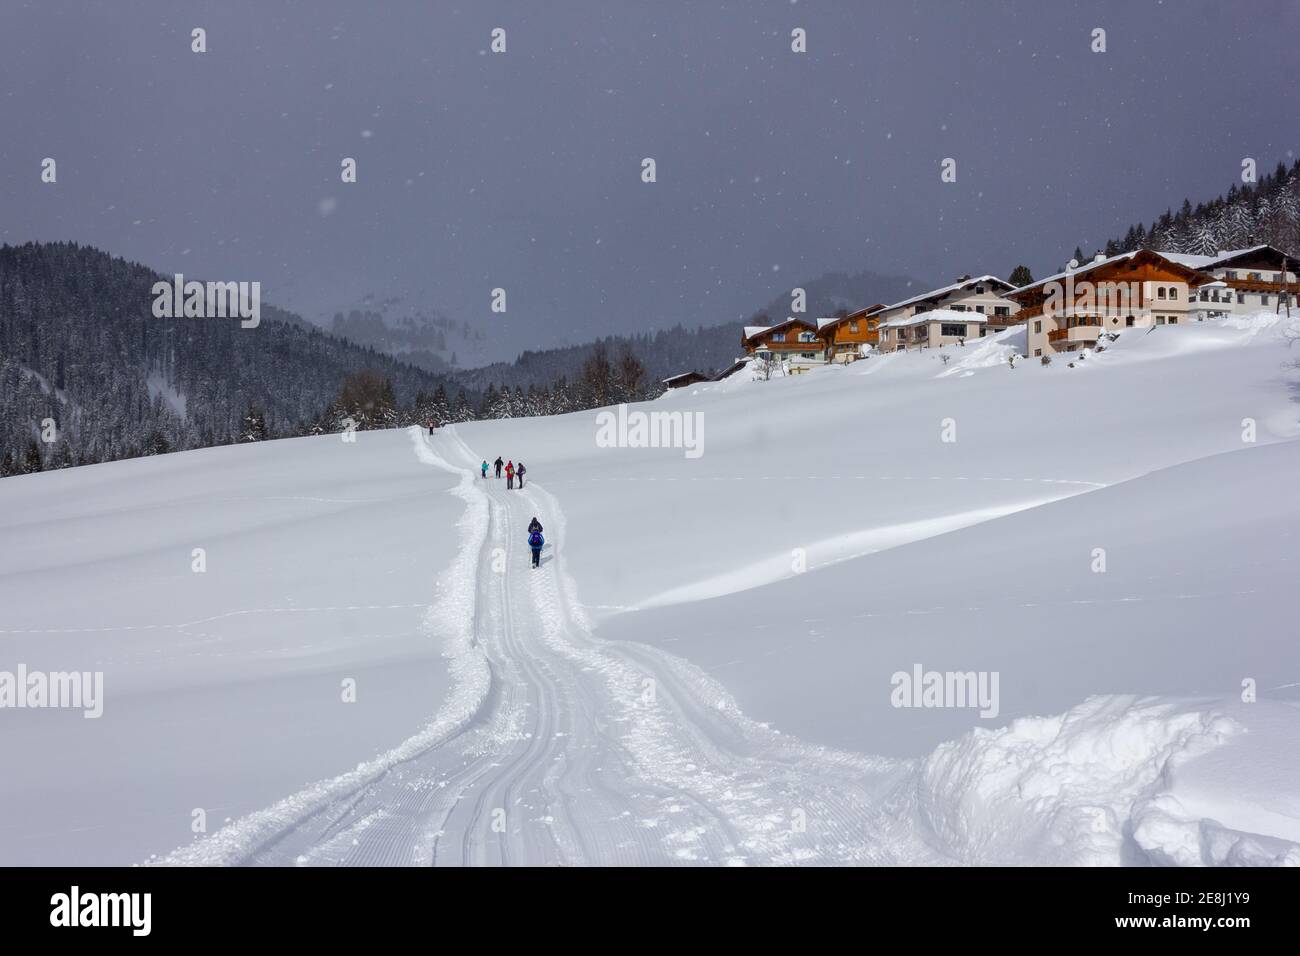 Several tourists hiking during snowy weather in the Alps with typical Austrian houses in the background Stock Photo